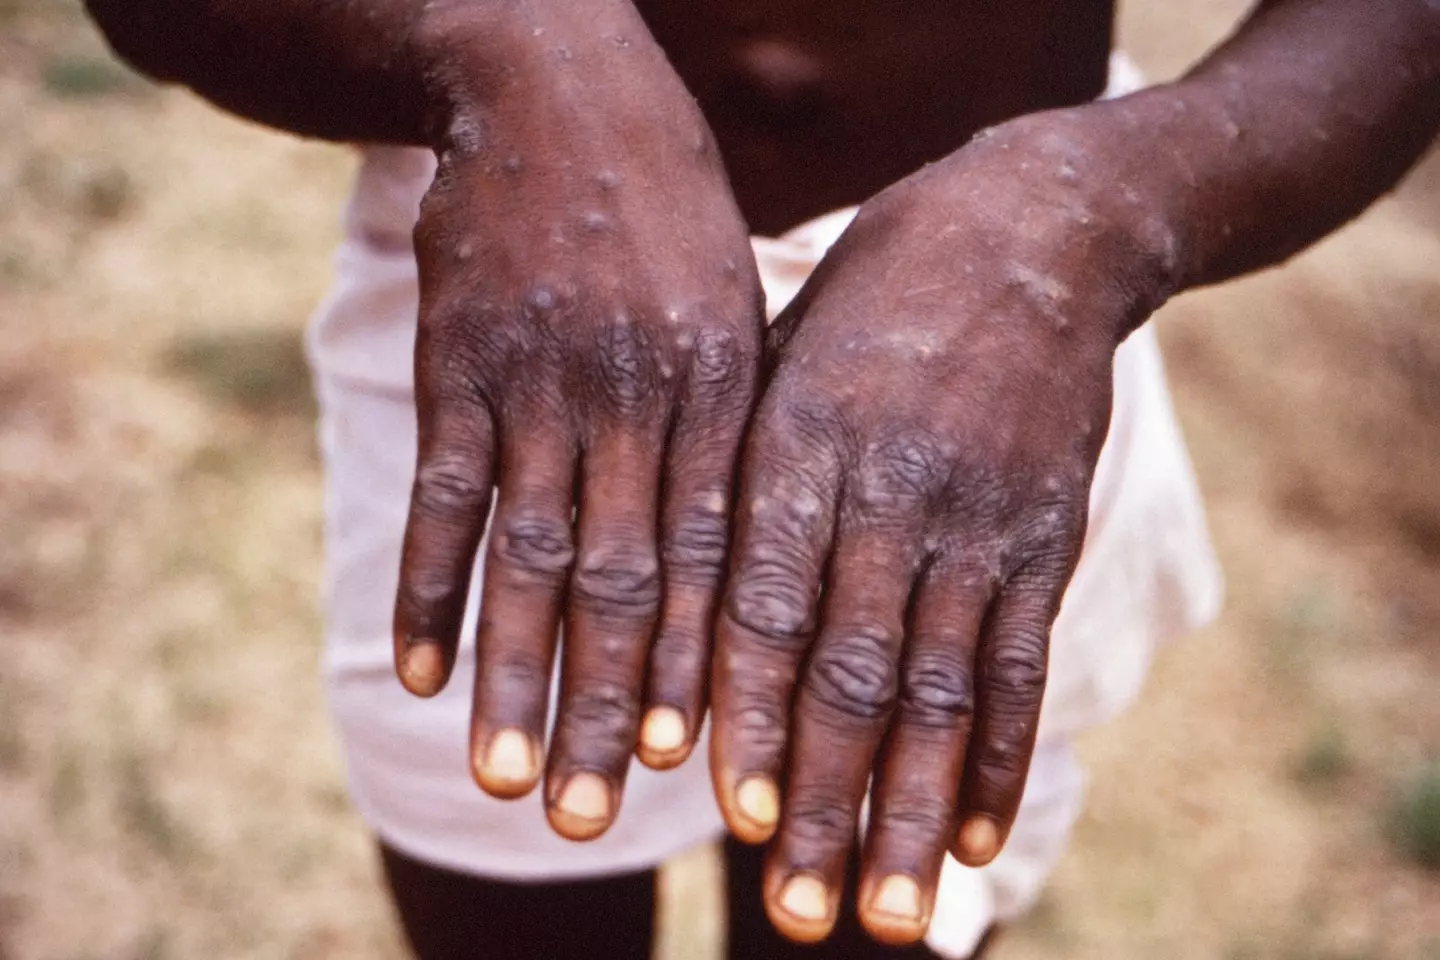 A chief medical adviser has warned of more UK cases of monkeypox.